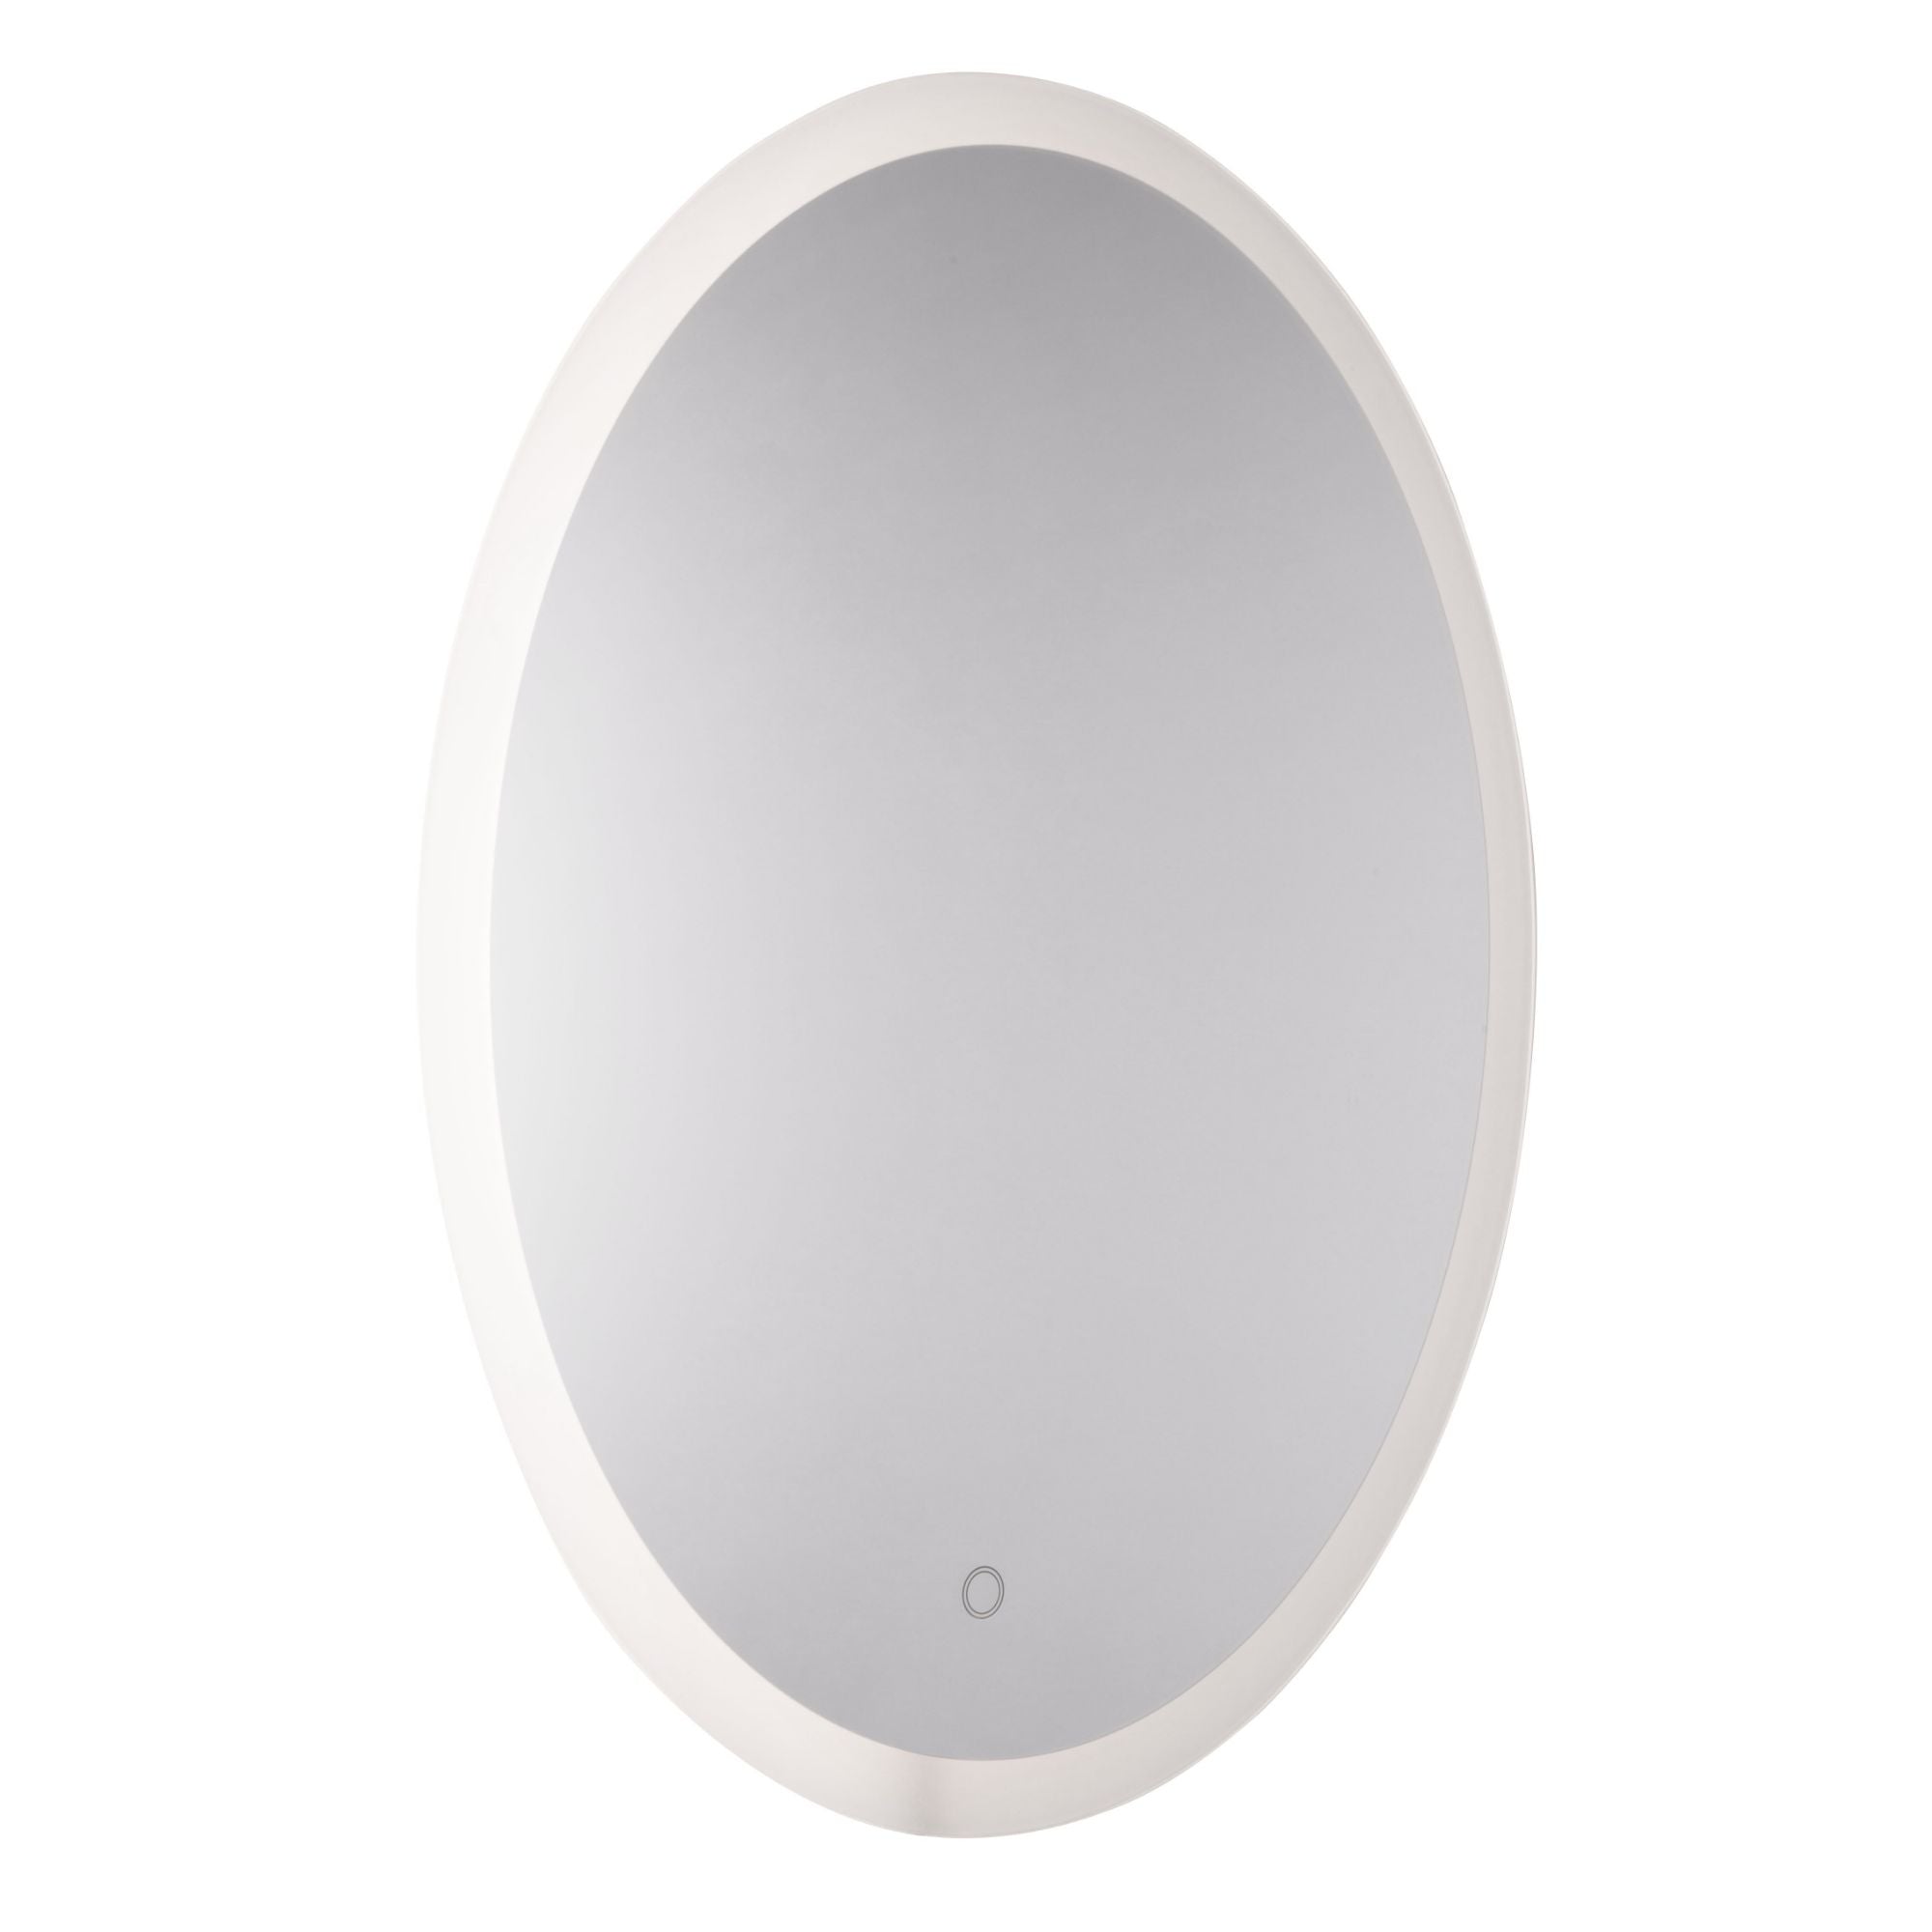 Reflections 29.5 inch wide Mirror - Frosted Edge